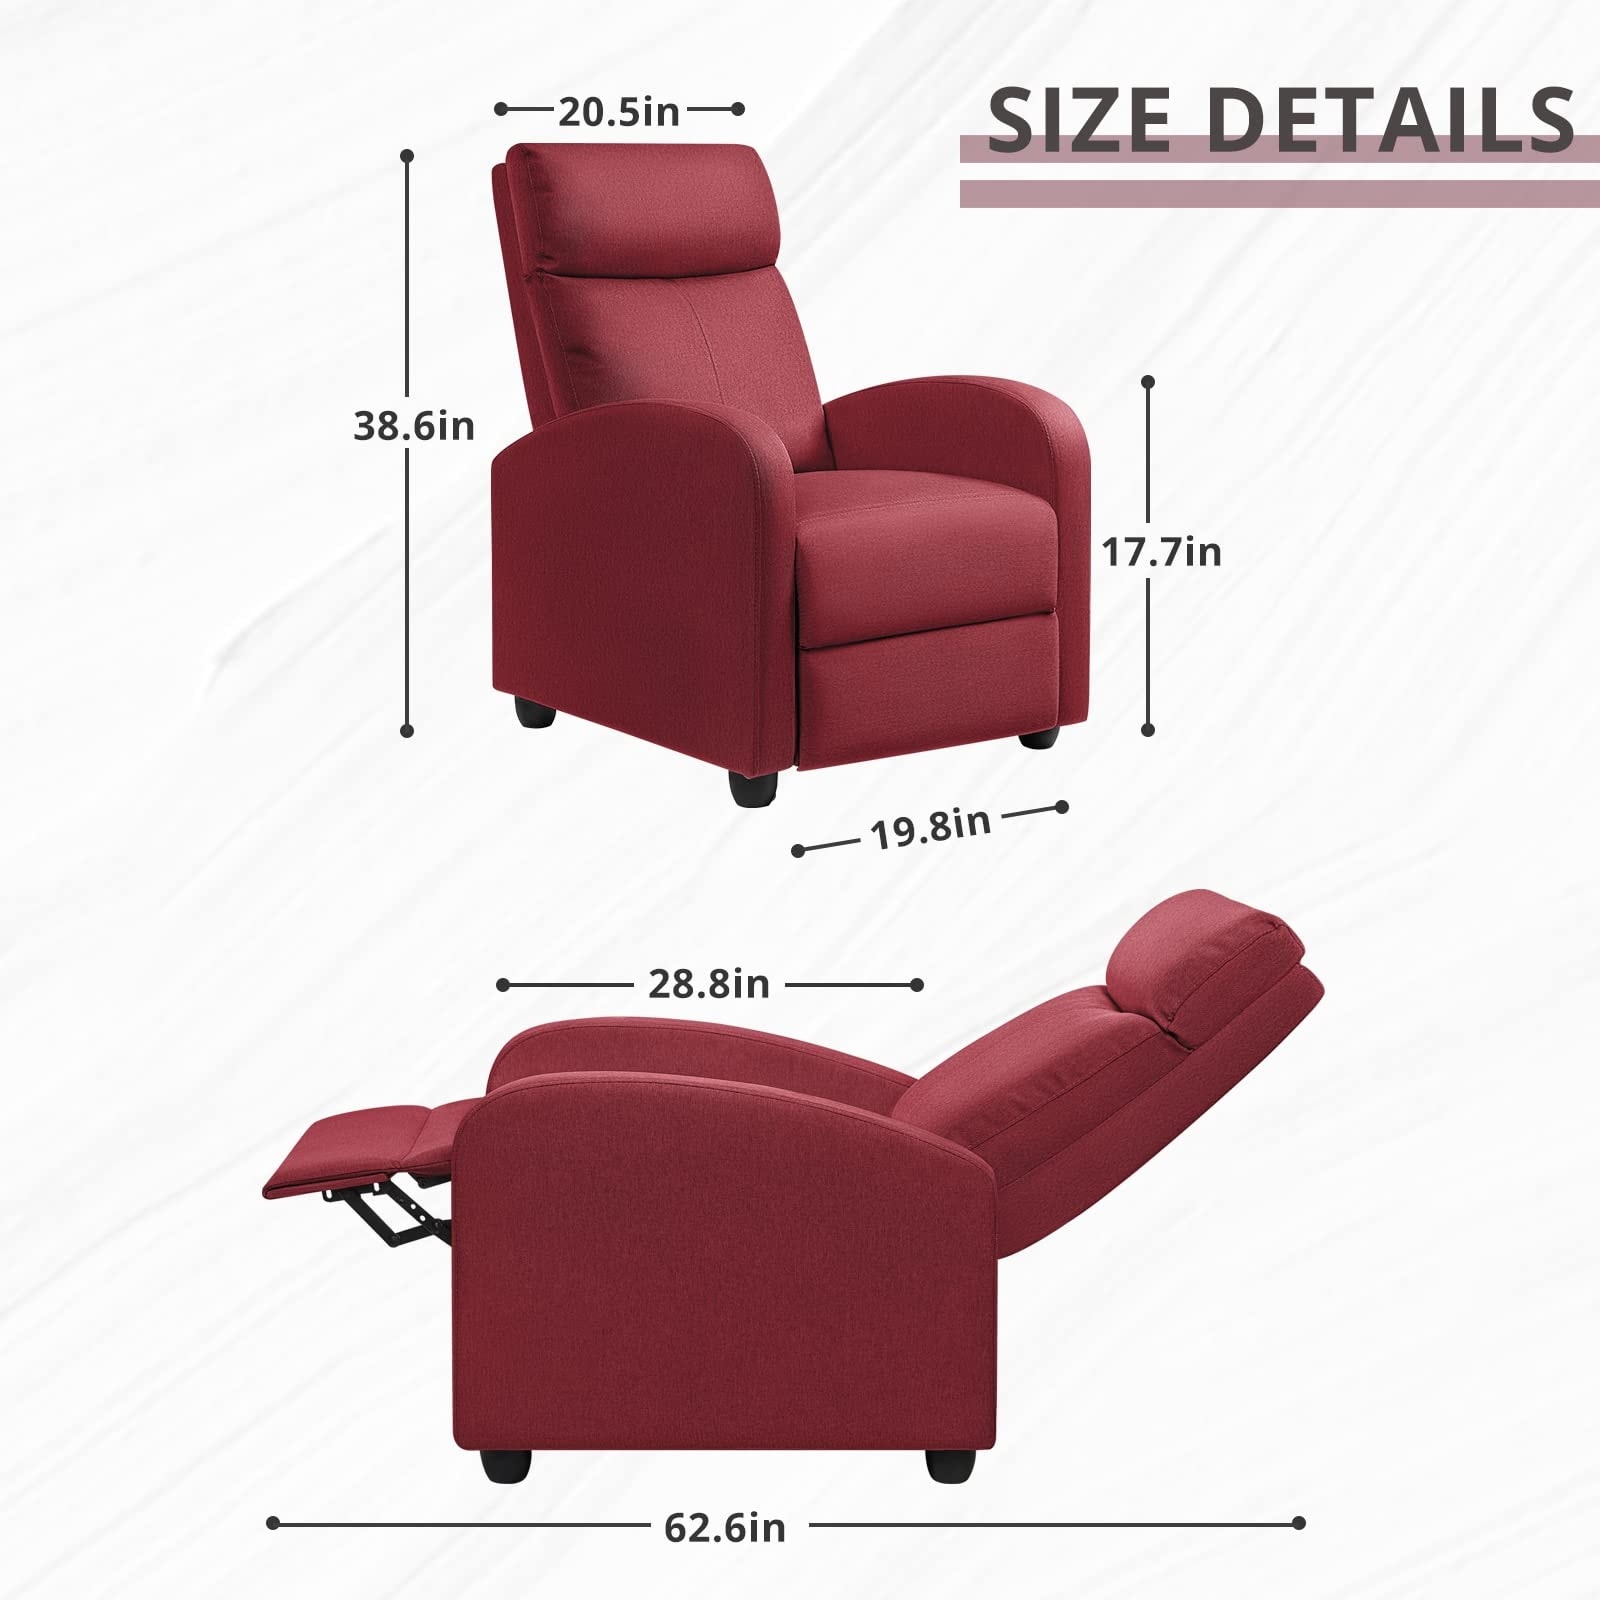 https://ak1.ostkcdn.com/images/products/is/images/direct/43b686ddc900d6584f0add33a38f1e32f5d0cdbe/Recliner-Chair-Adjustable-Home-Theater-Single-Fabric-Sofa-Furniture-with-Thick-Seat-Cushion-and-Backrest-Living-Room-Recliners.jpg